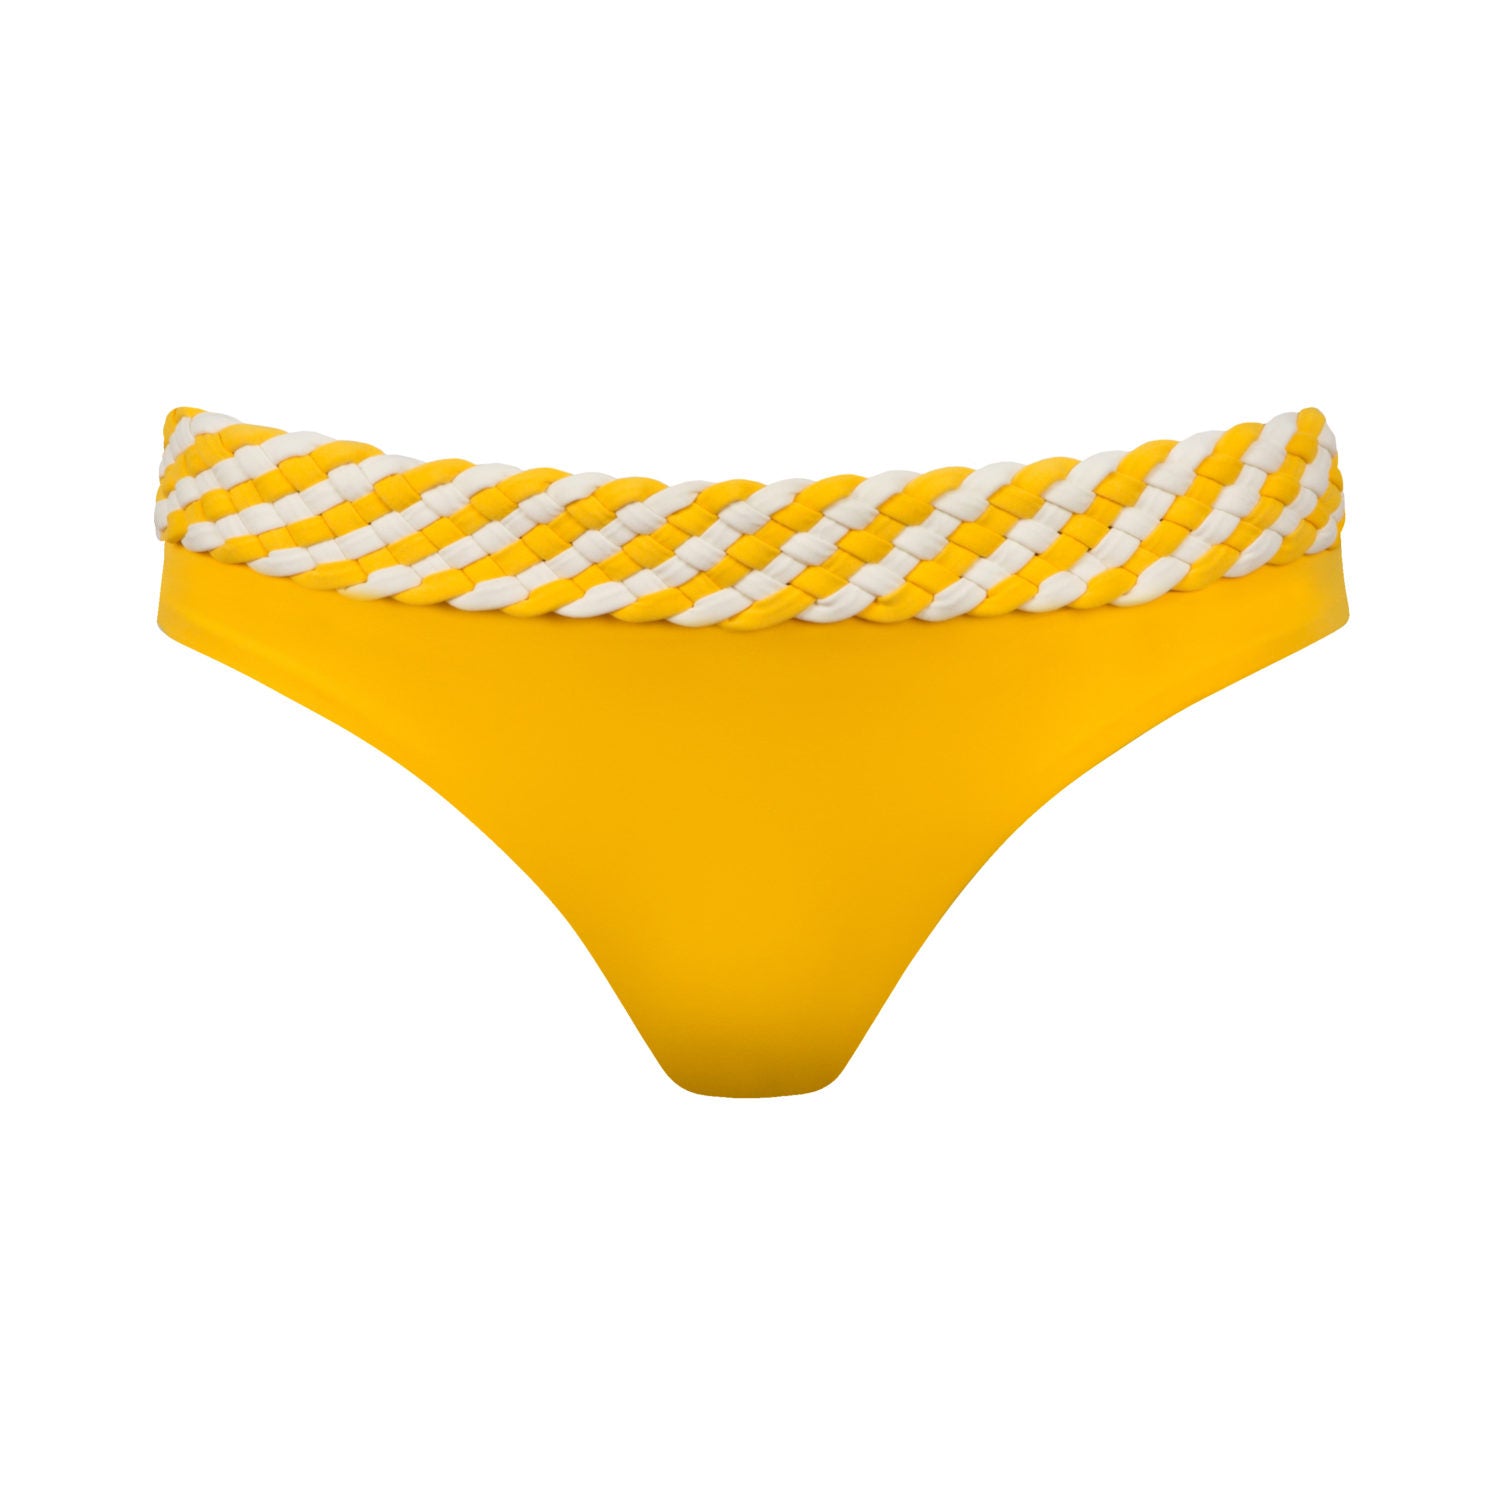 SOL BRIEF IN AMBER